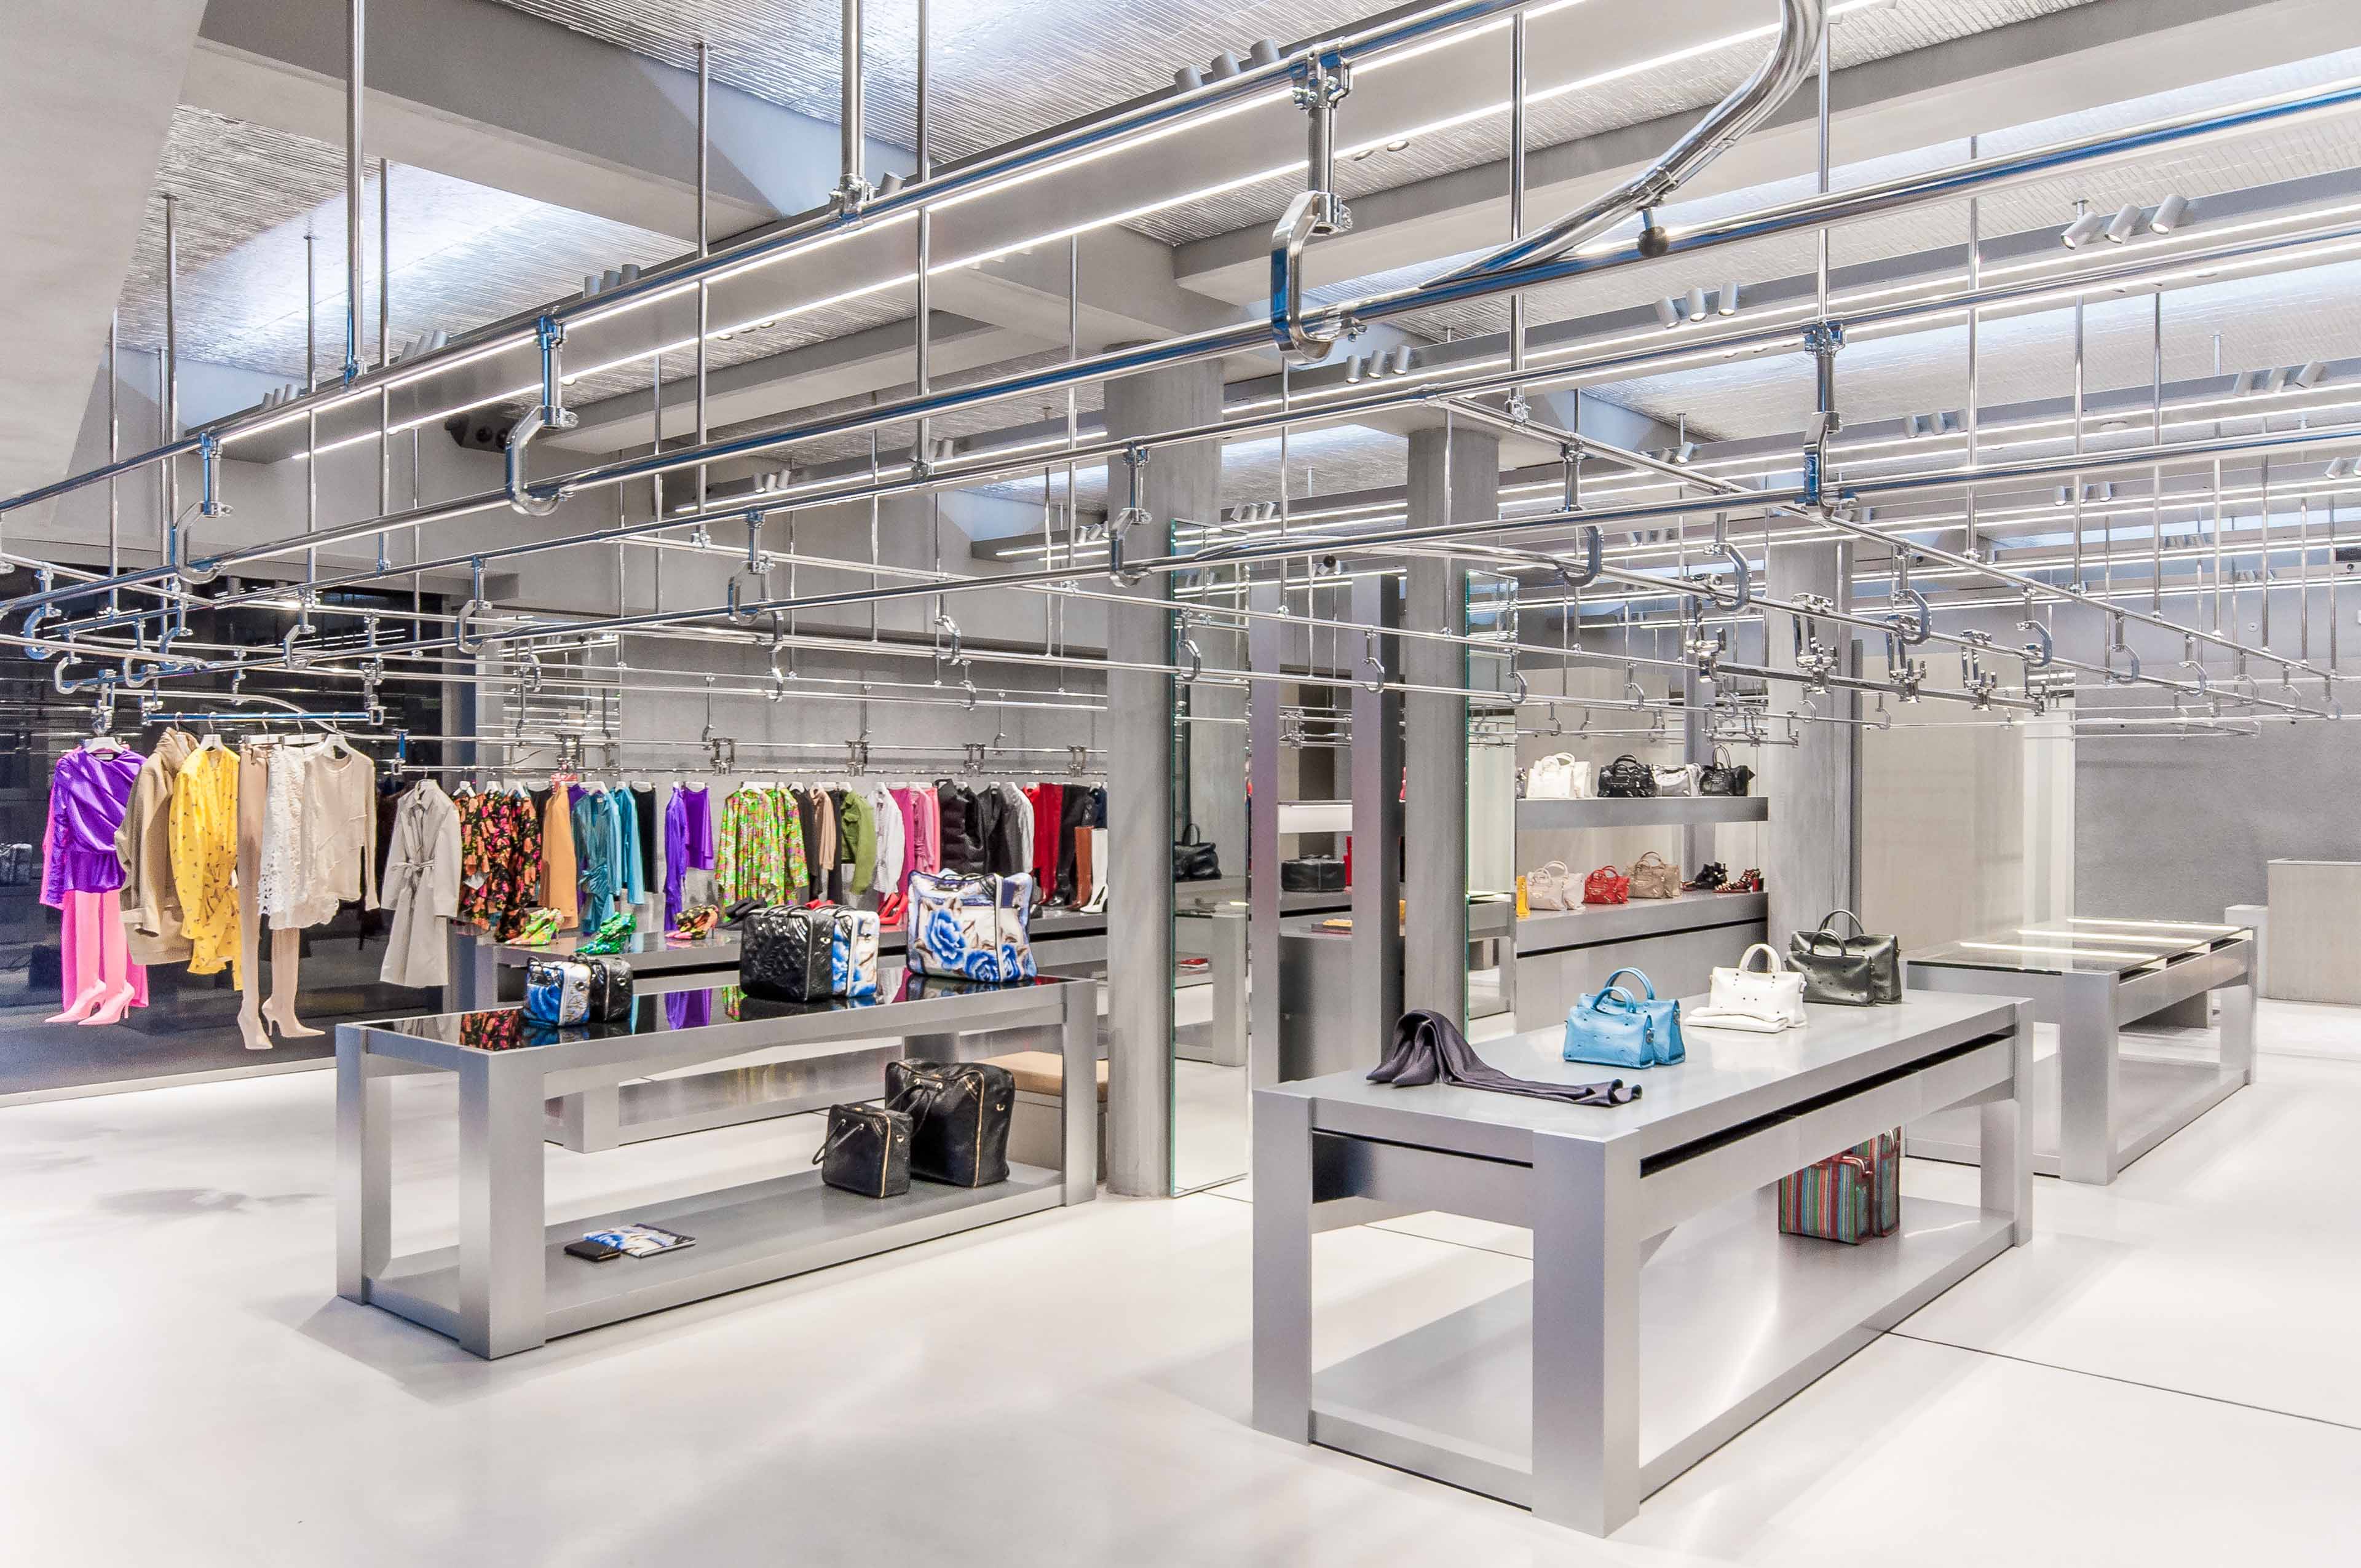 Reliance is opening the first Balenciaga store in New Delhi Details inside   The Financial Express